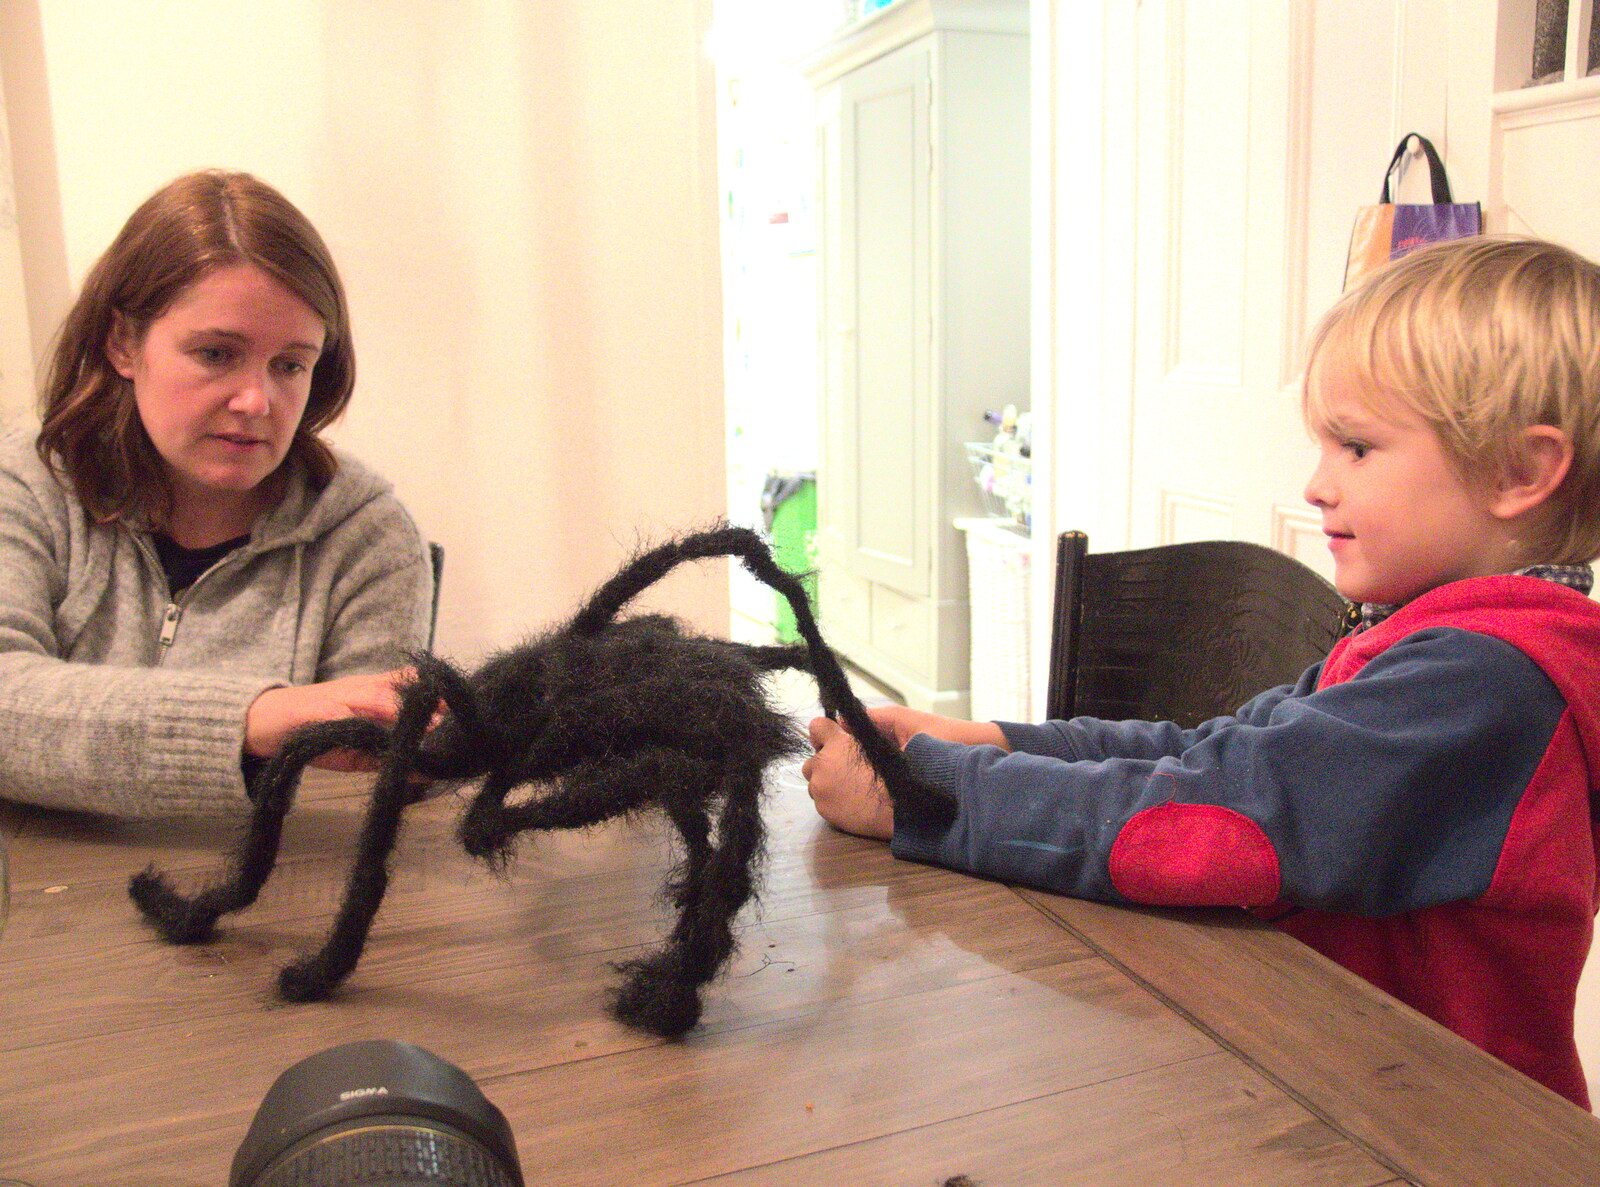 There's a giant hairy spider on the table from Fondue with the Swiss Massive, Gwydir Street, Cambridge - 19th November 2016